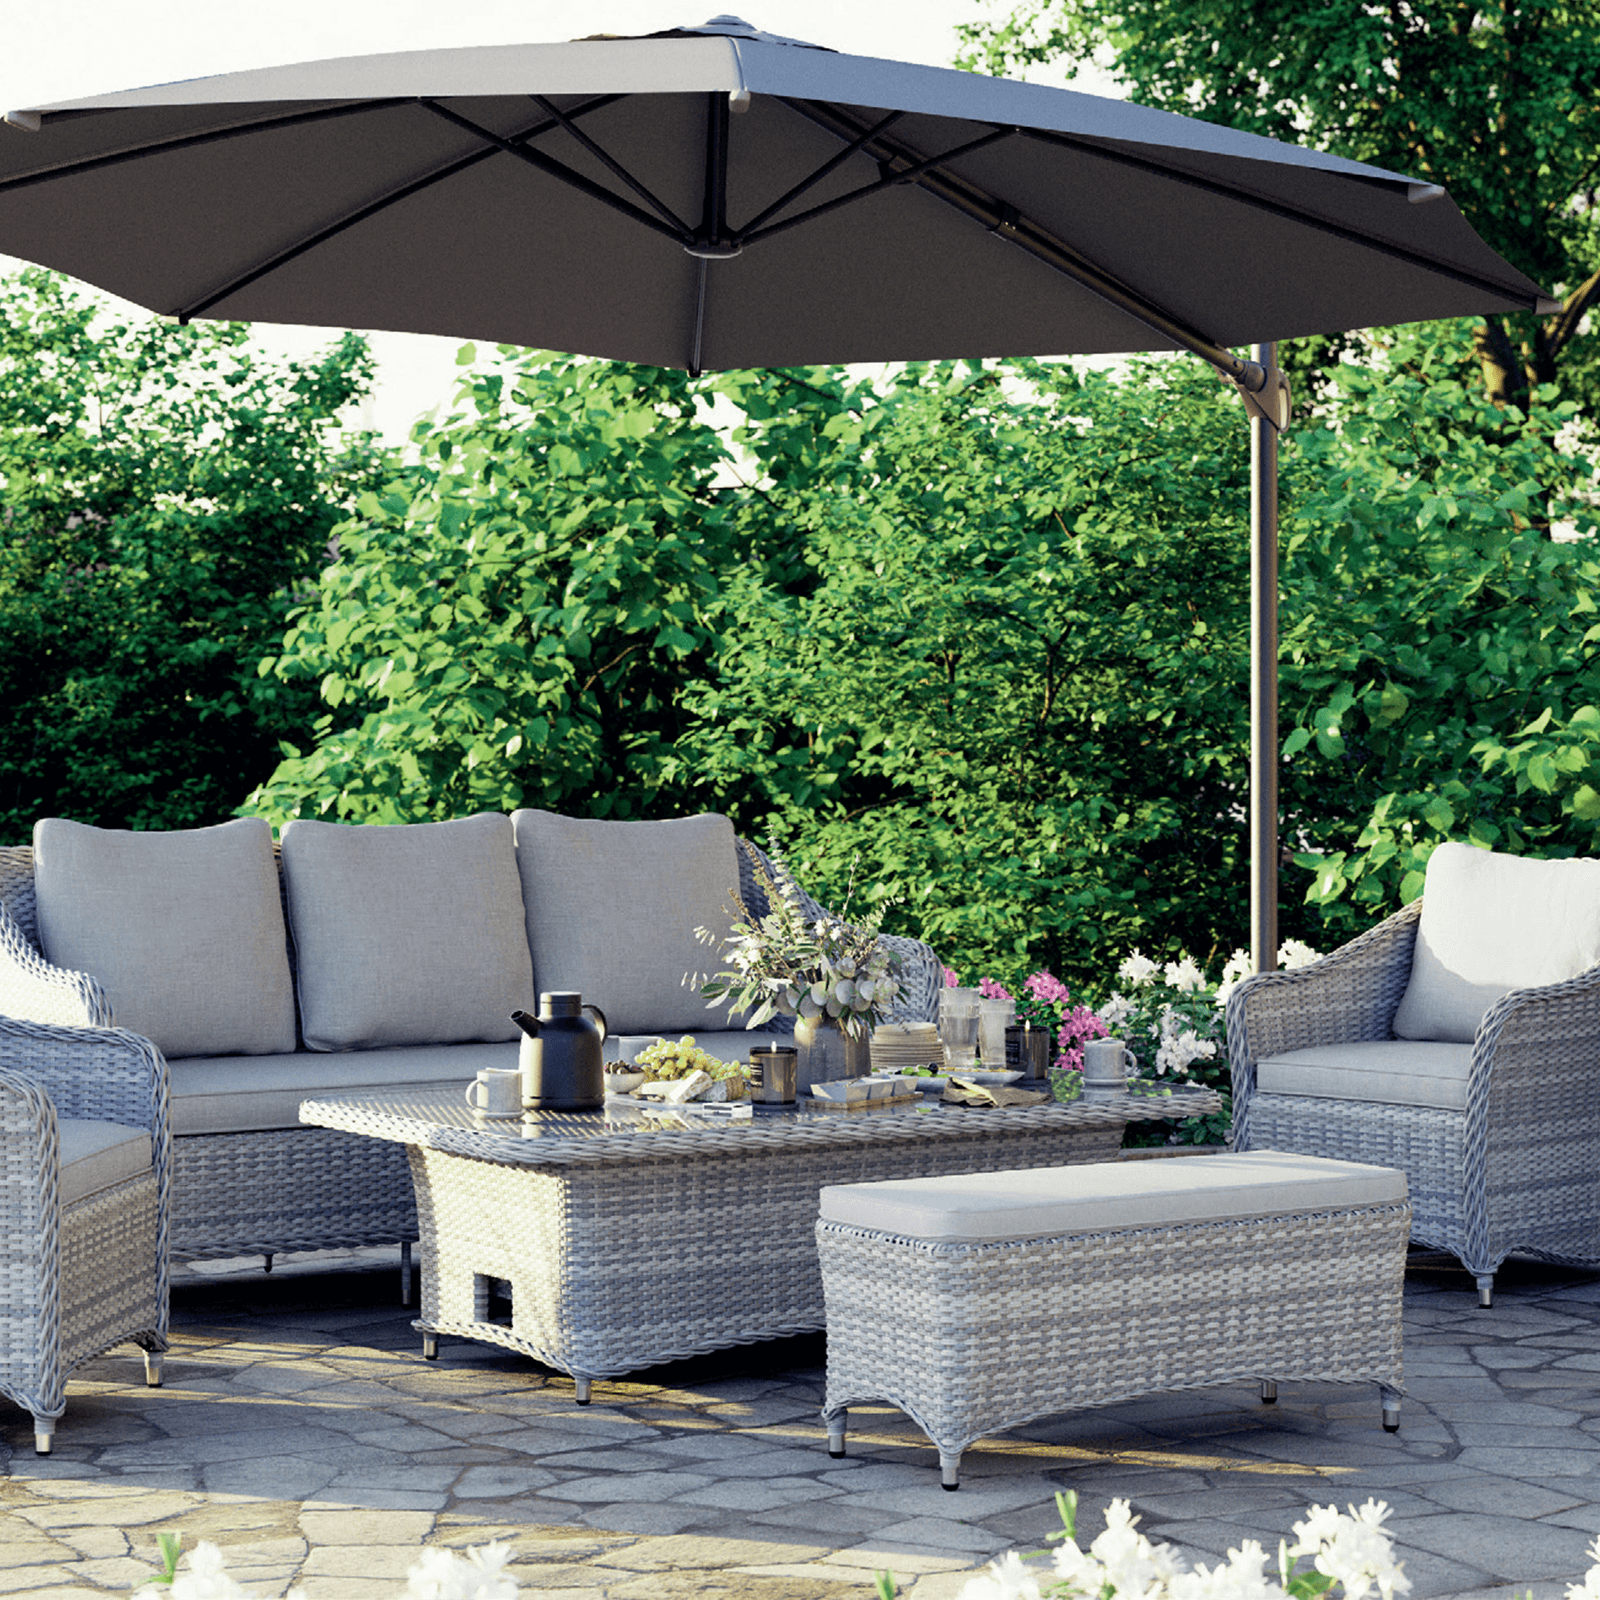 Irati 5-Piece grey wicker outdoor seating set with aluminum frame, light grey cushions, 1 three-seater sofa, 2 armchairs, 1 bench, 1 lift top dining table, under a round offsite umbrella- Jardina Furniture#color_Grey